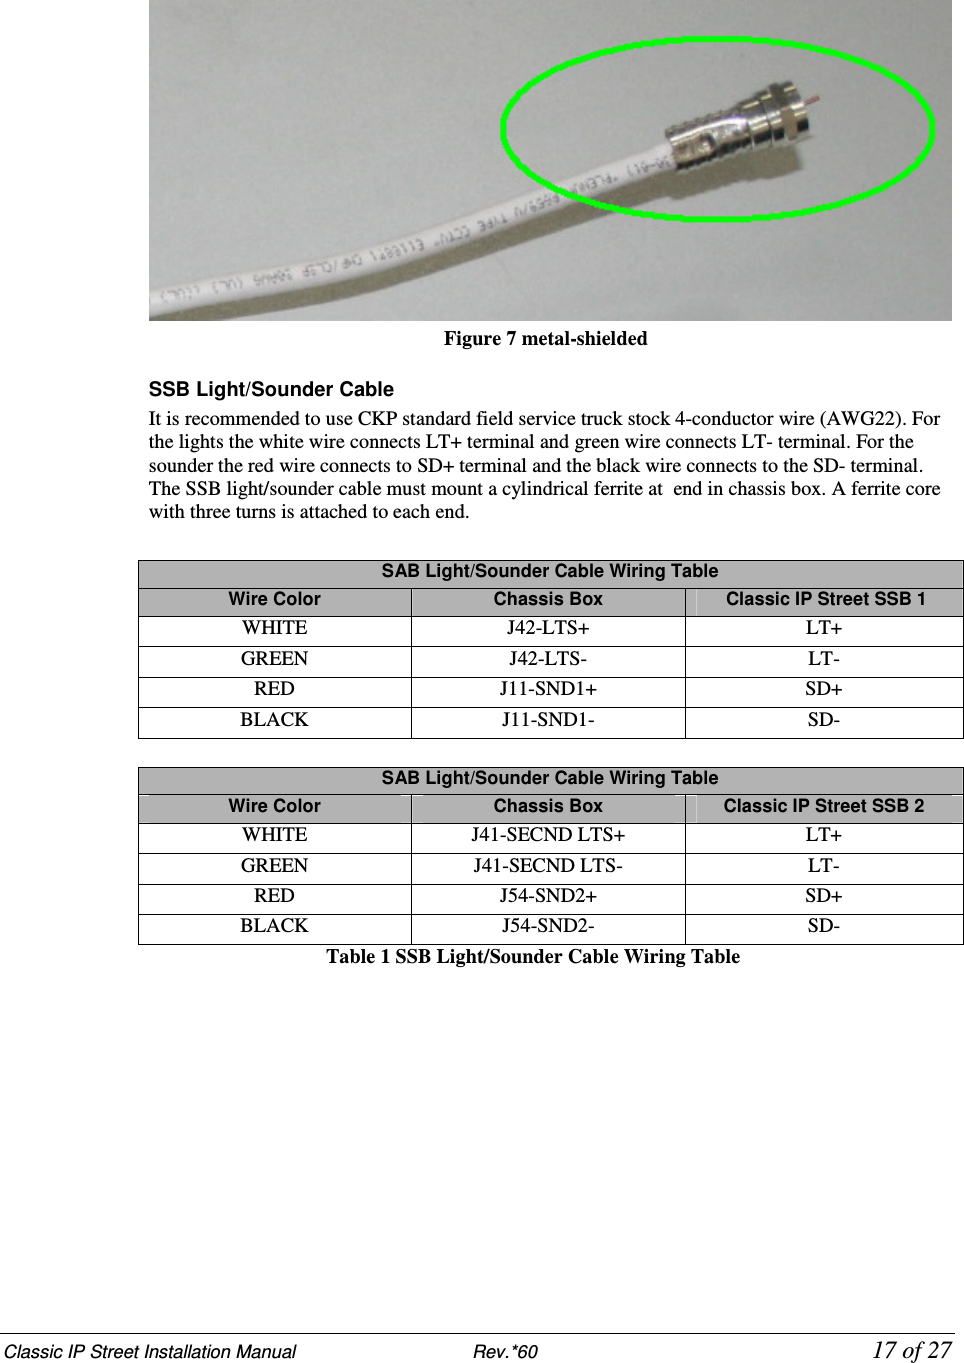 Classic IP Street Installation Manual                           Rev.*60            17 of 27                                                           Figure 7 metal-shielded  SSB Light/Sounder Cable It is recommended to use CKP standard field service truck stock 4-conductor wire (AWG22). For the lights the white wire connects LT+ terminal and green wire connects LT- terminal. For the sounder the red wire connects to SD+ terminal and the black wire connects to the SD- terminal. The SSB light/sounder cable must mount a cylindrical ferrite at  end in chassis box. A ferrite core with three turns is attached to each end.  SAB Light/Sounder Cable Wiring Table Wire Color  Chassis Box   Classic IP Street SSB 1 WHITE  J42-LTS+  LT+ GREEN  J42-LTS-  LT- RED  J11-SND1+  SD+ BLACK  J11-SND1-  SD-  SAB Light/Sounder Cable Wiring Table Wire Color  Chassis Box  Classic IP Street SSB 2 WHITE  J41-SECND LTS+  LT+ GREEN  J41-SECND LTS-  LT- RED  J54-SND2+  SD+ BLACK  J54-SND2-  SD-                       Table 1 SSB Light/Sounder Cable Wiring Table  